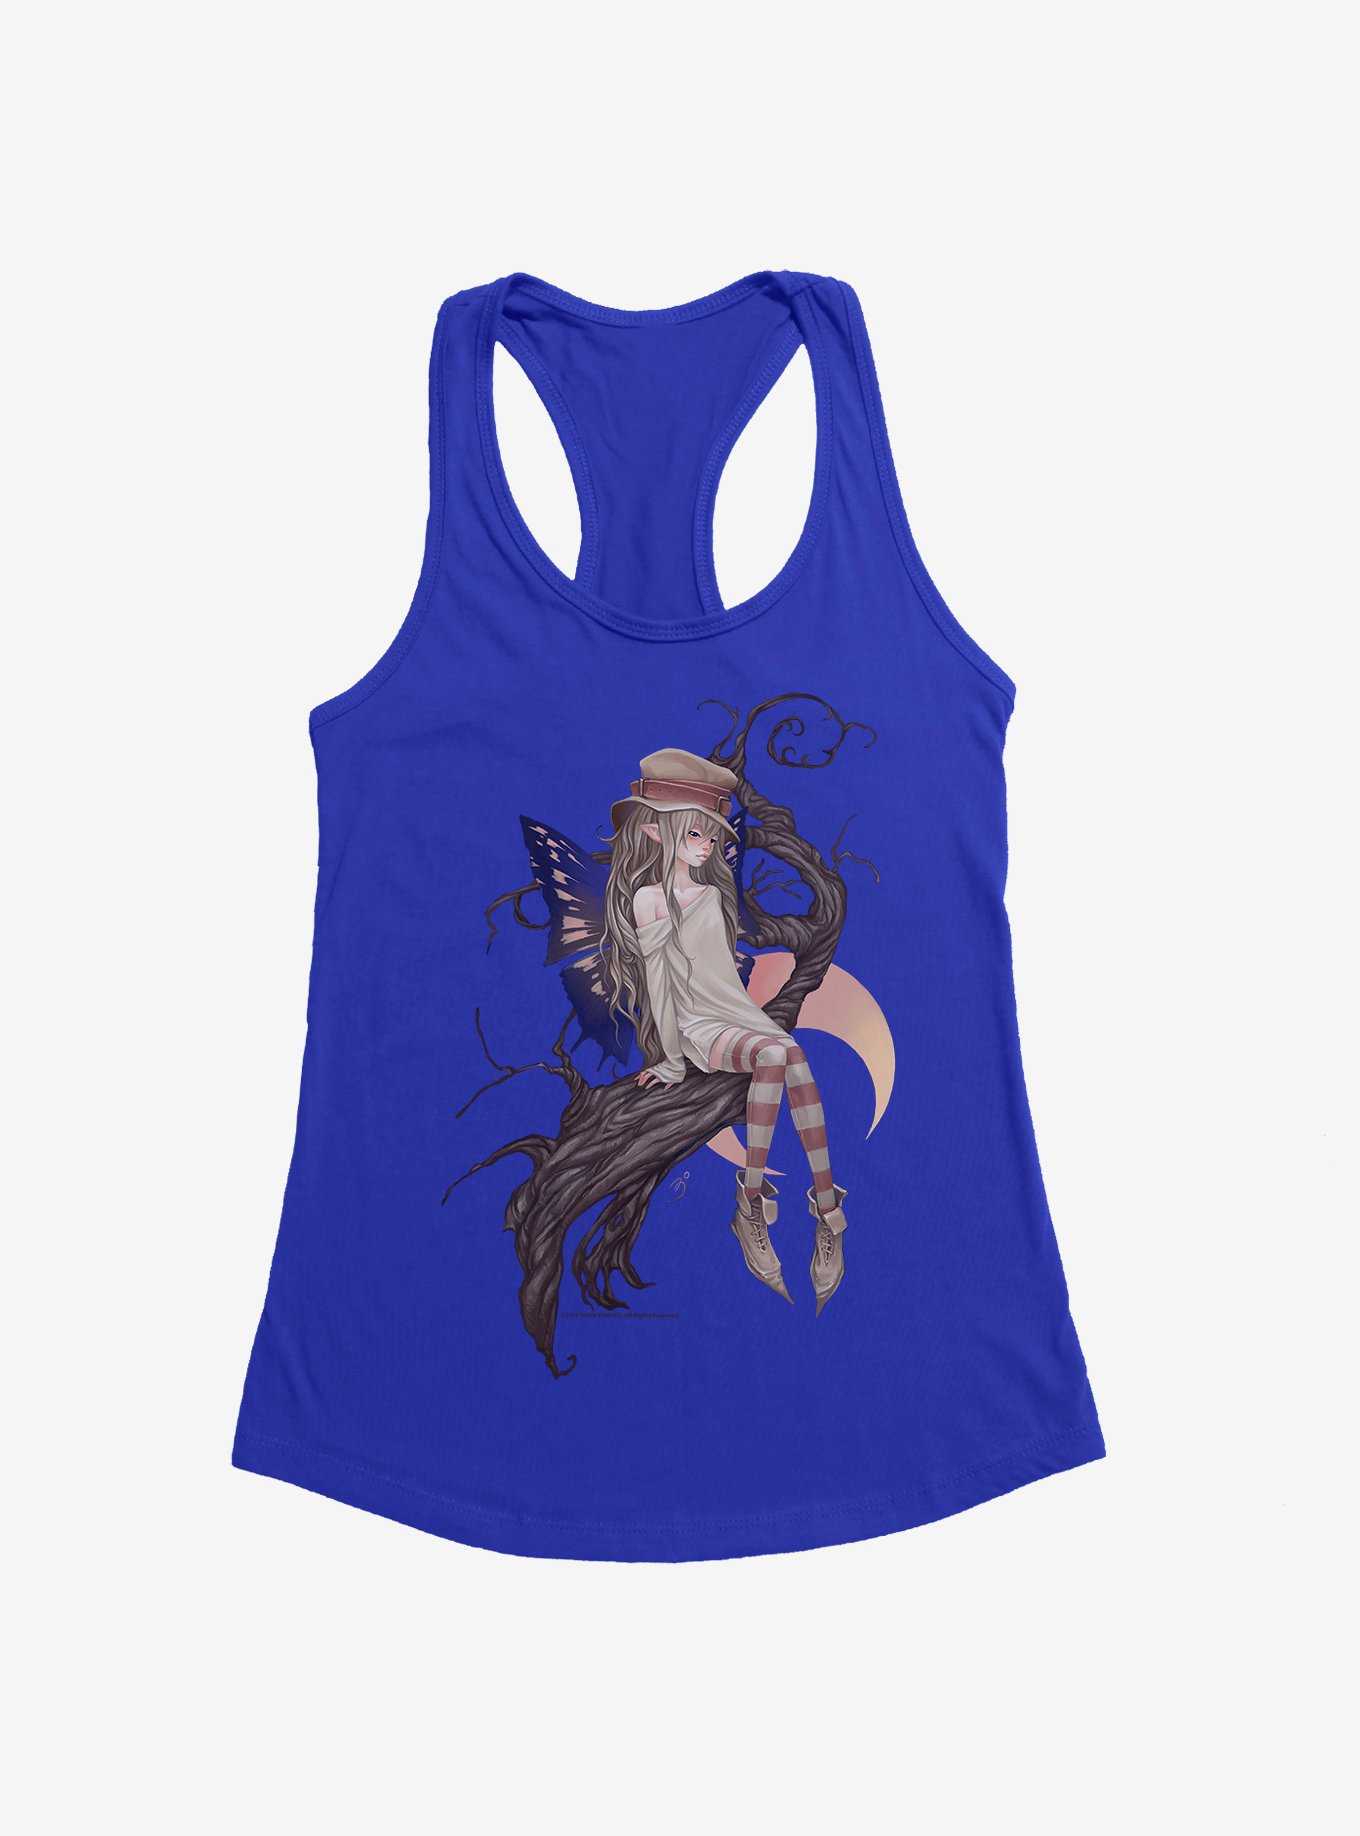 Fairies By Trick Butterfly Fairy Girls Tank, , hi-res